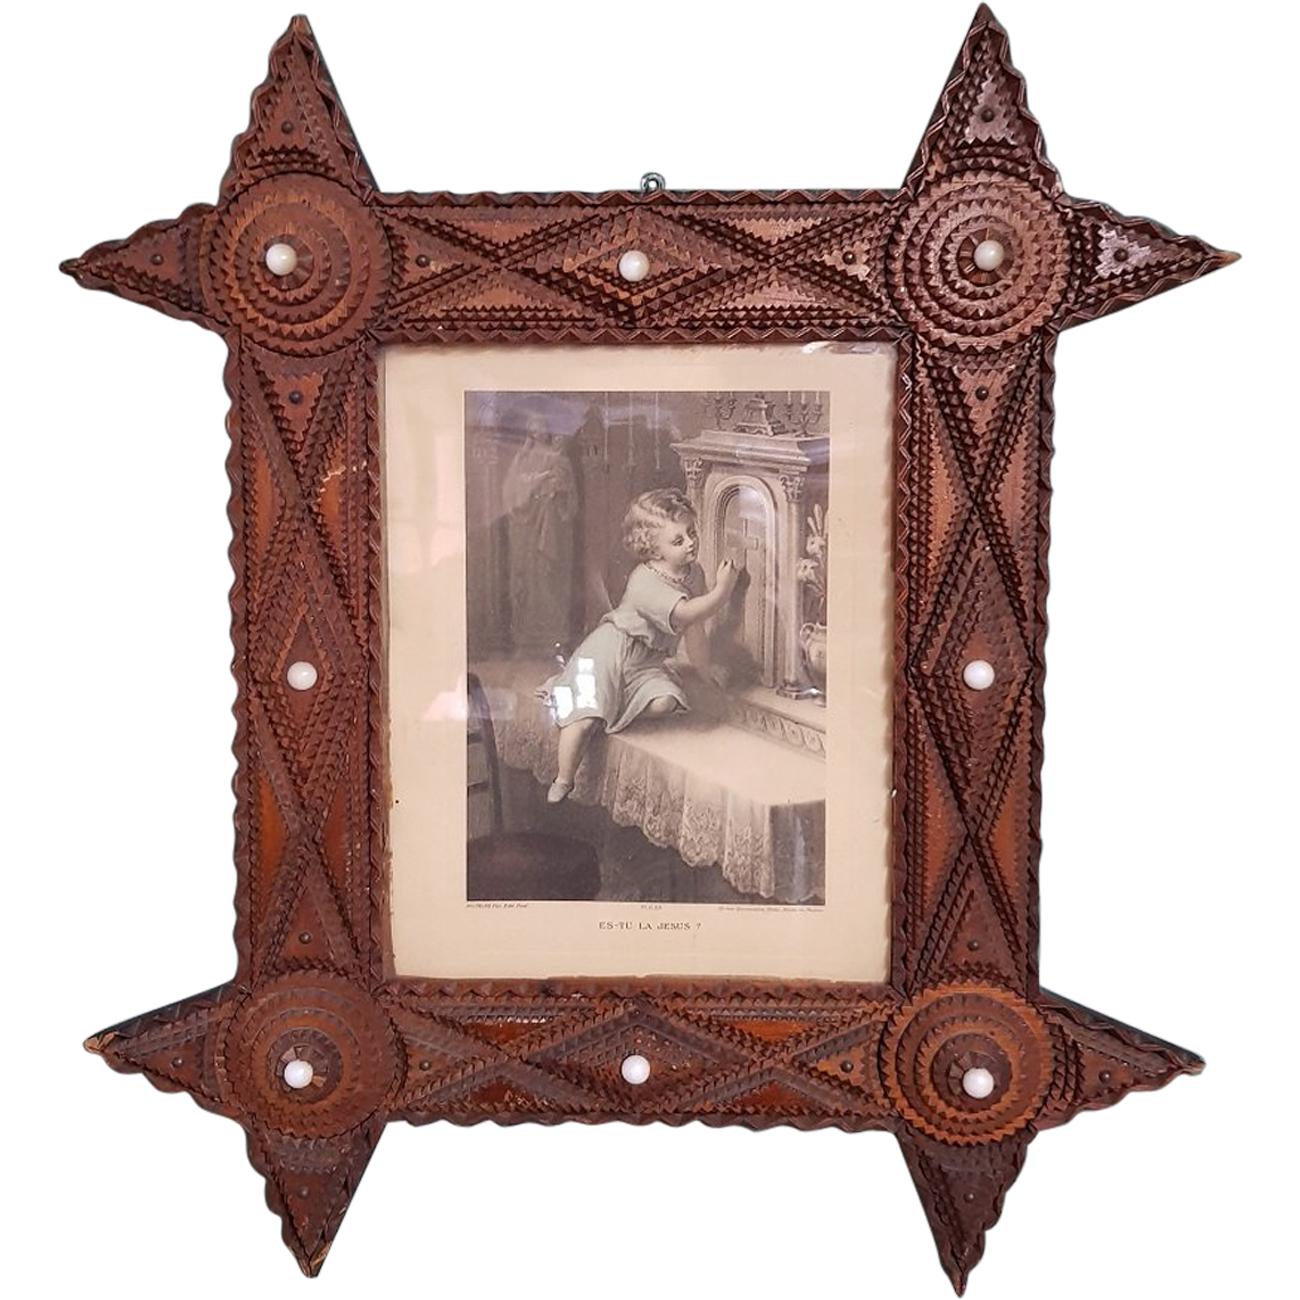 Tramp Art Picture Frame from circa 1900